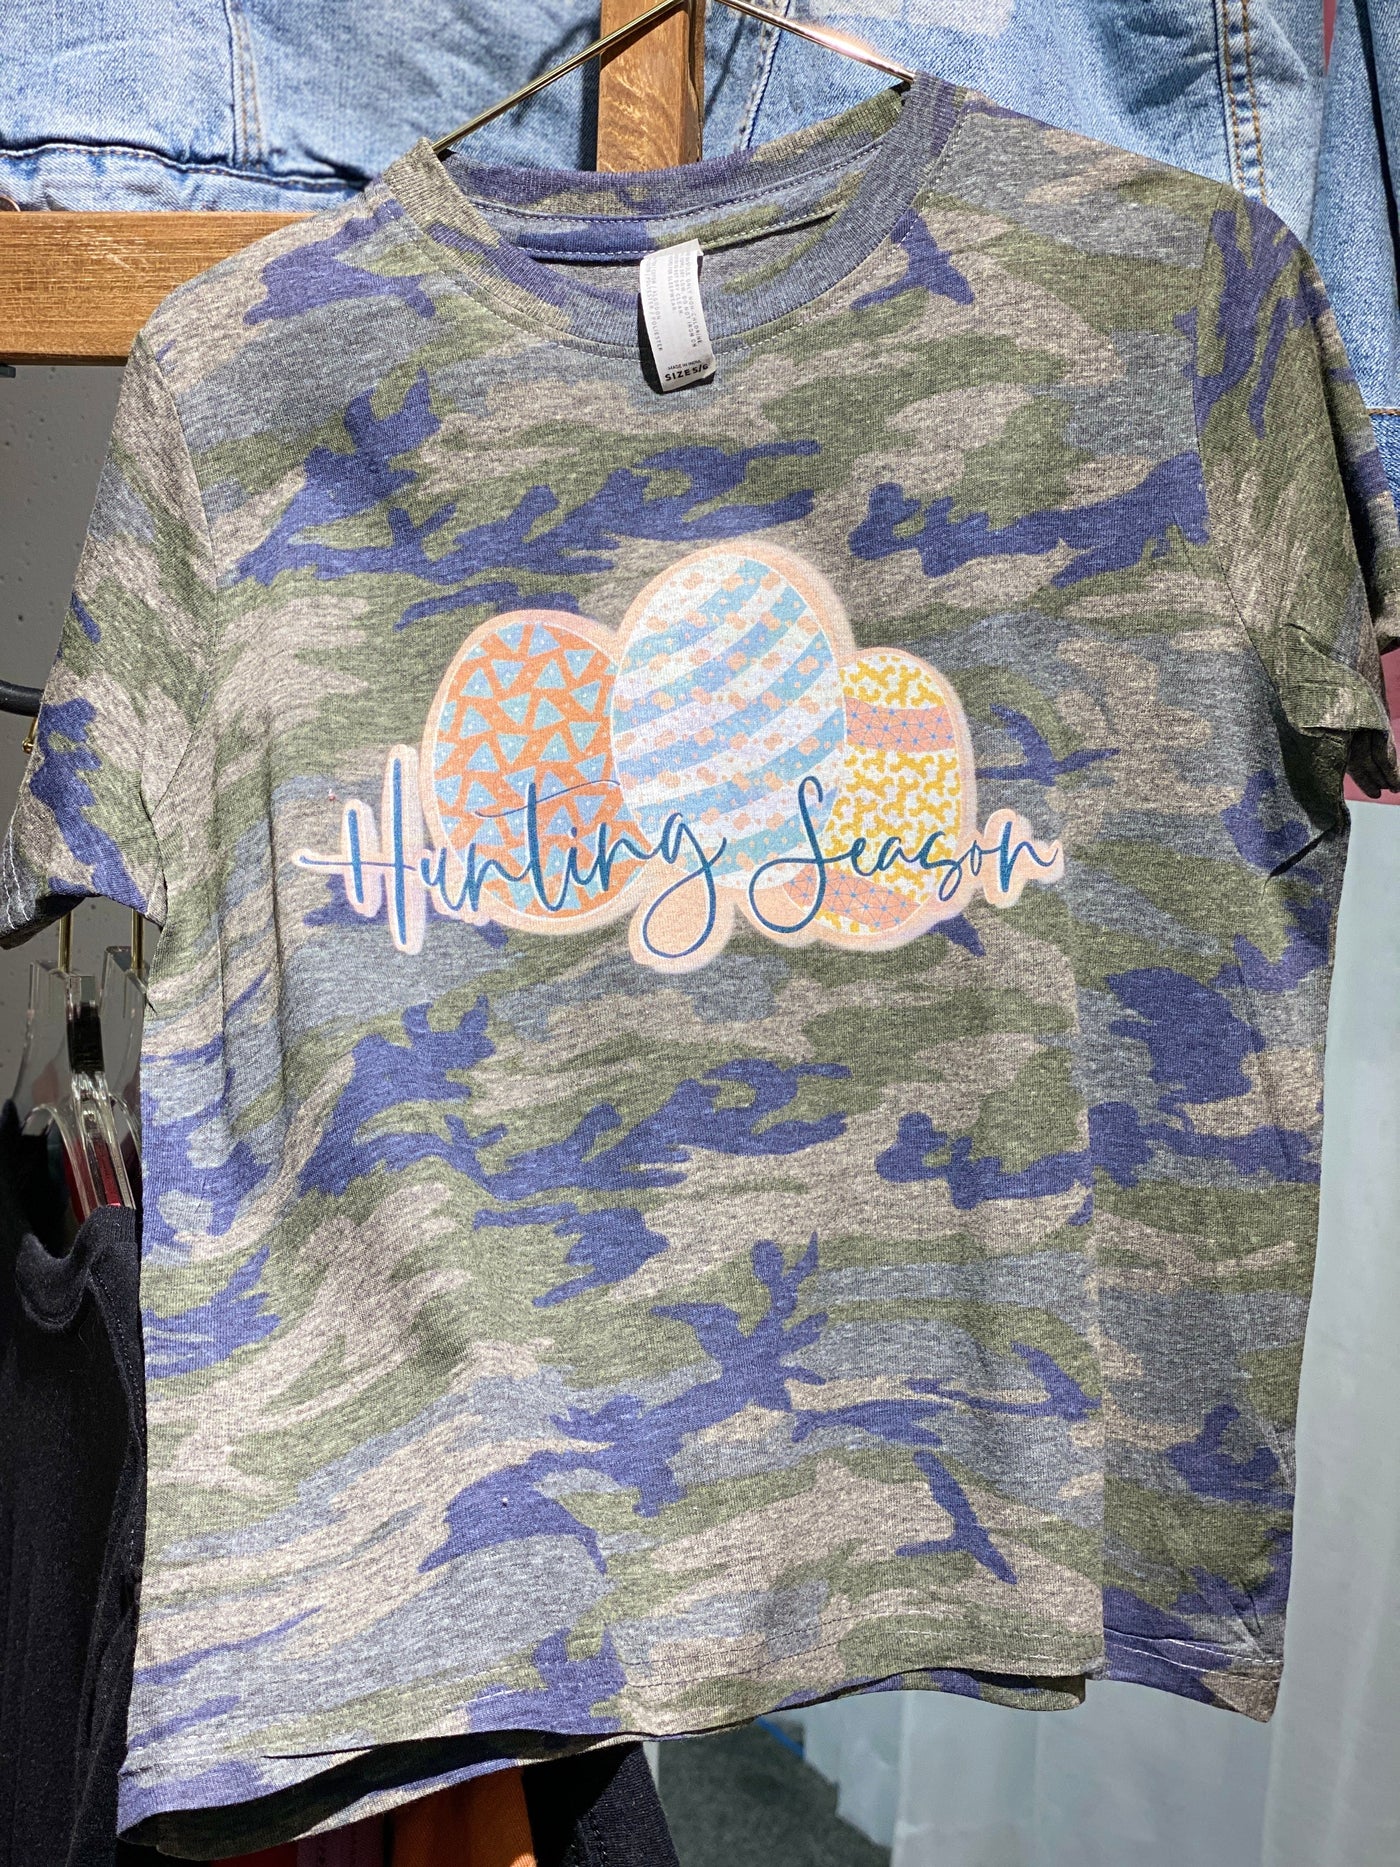 Heathered camo tee with a graphic of three differently decorated easter eggs and the words "Hunting Season" In a blue cursive font